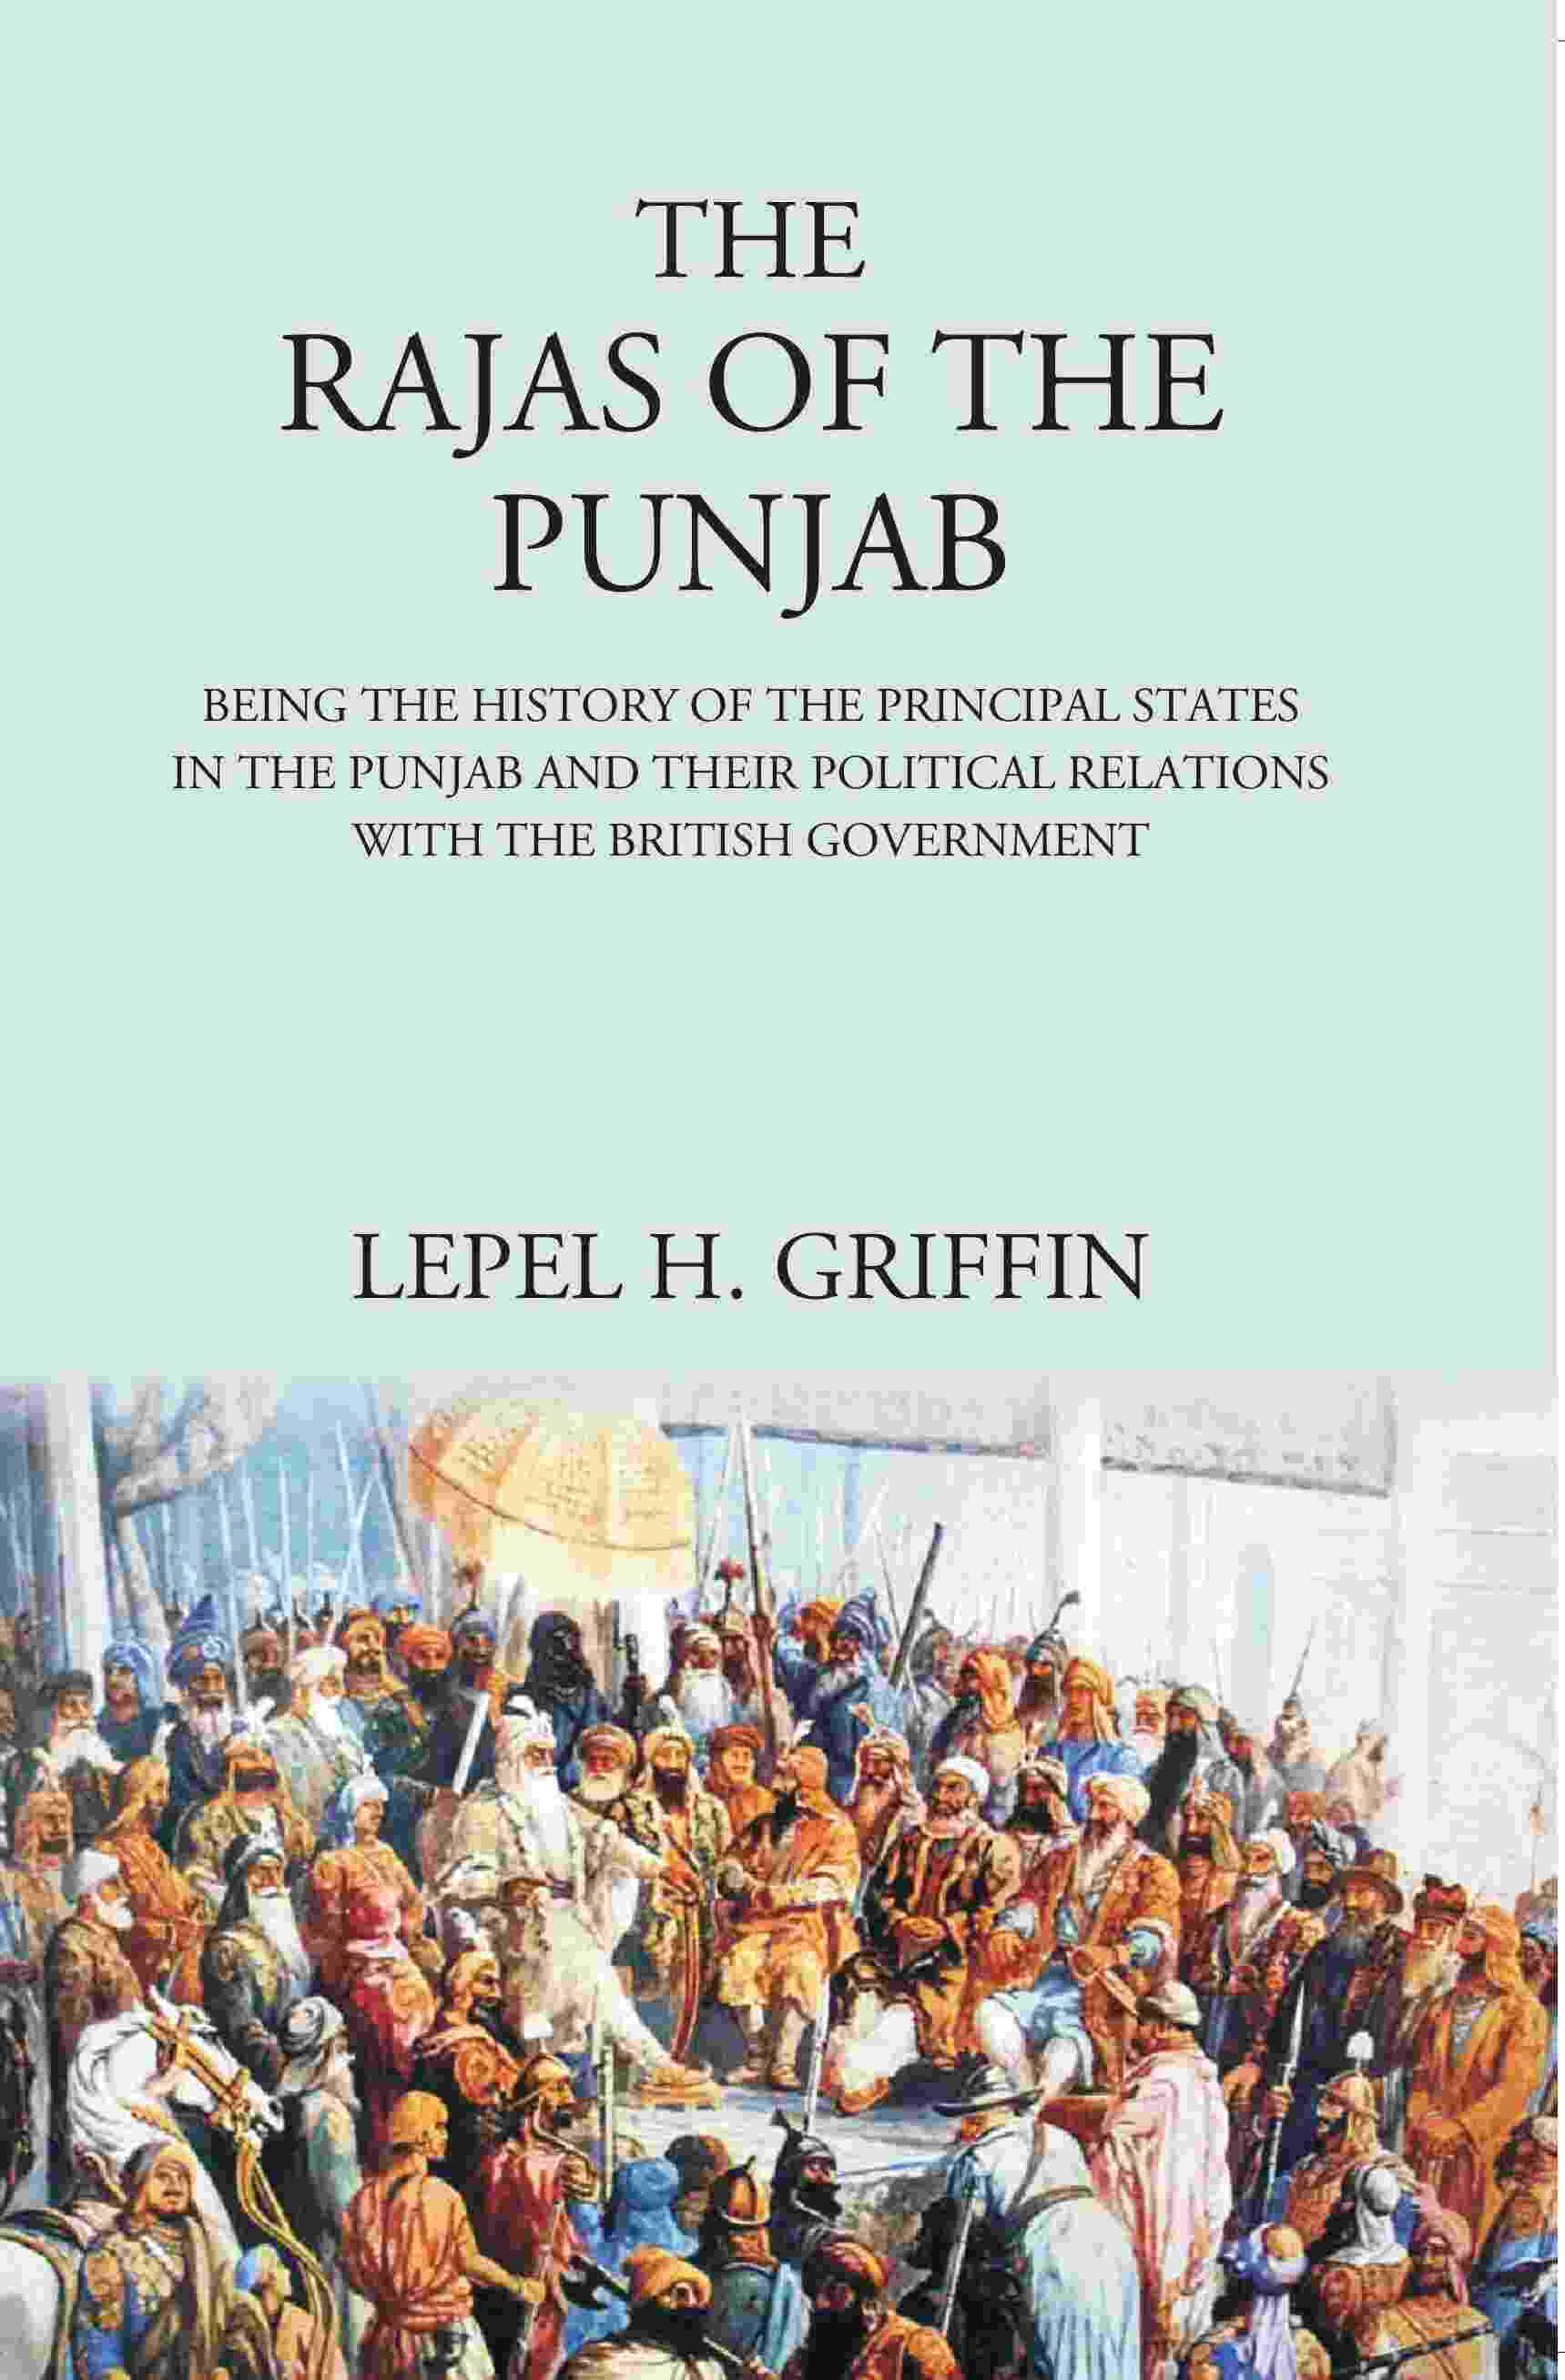 The Rajas of the Punjab : Being the History of the Principal States in the Punjab and Their Political Relations with the British Government